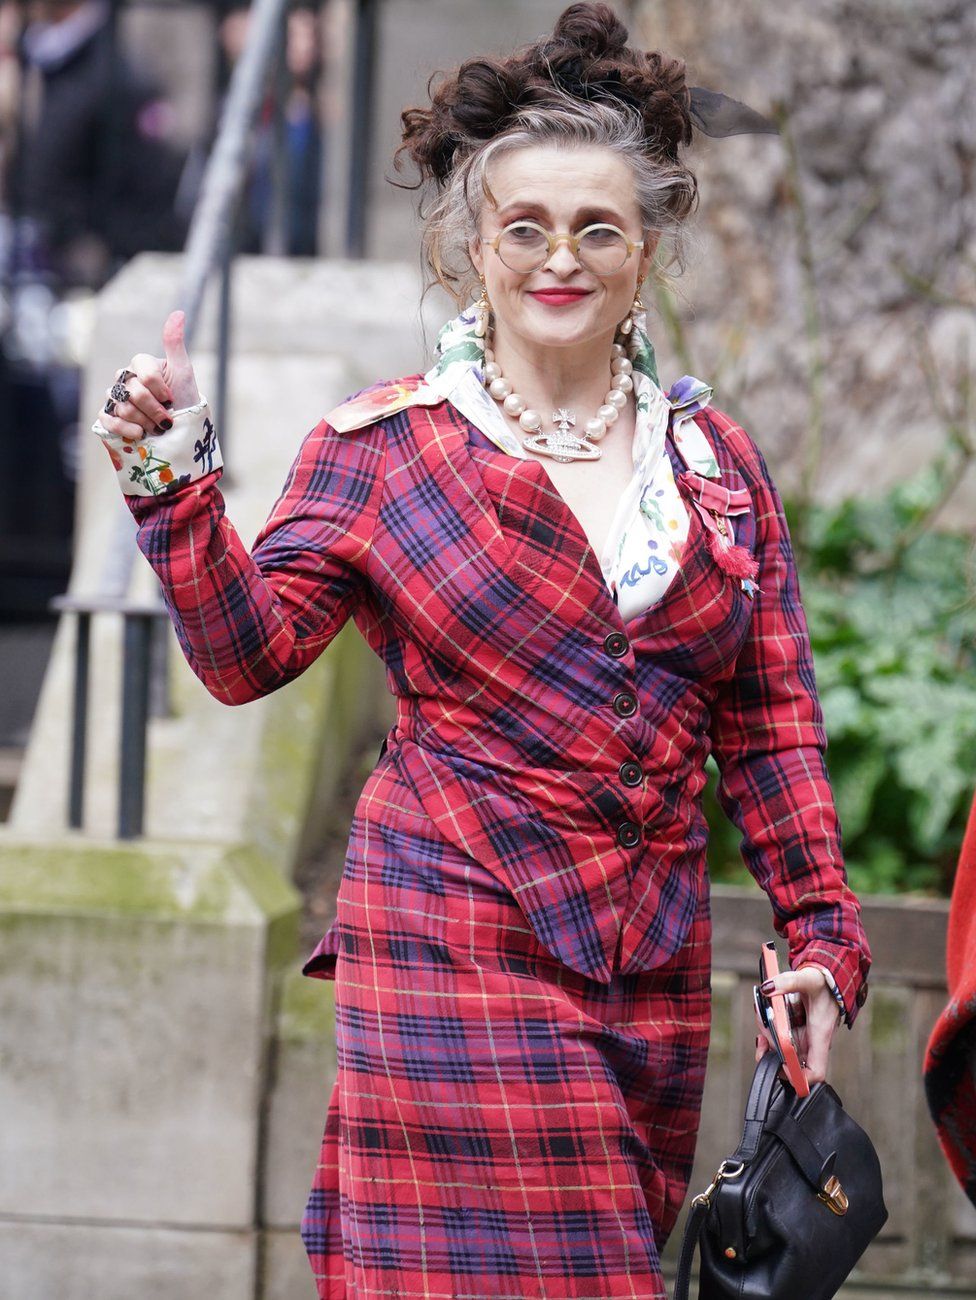 Helena Bonham Carter arrives for a memorial service to honour and celebrate the life of fashion designer Dame Vivienne Westwood at Southwark Cathedral, London, who died aged 81 in December